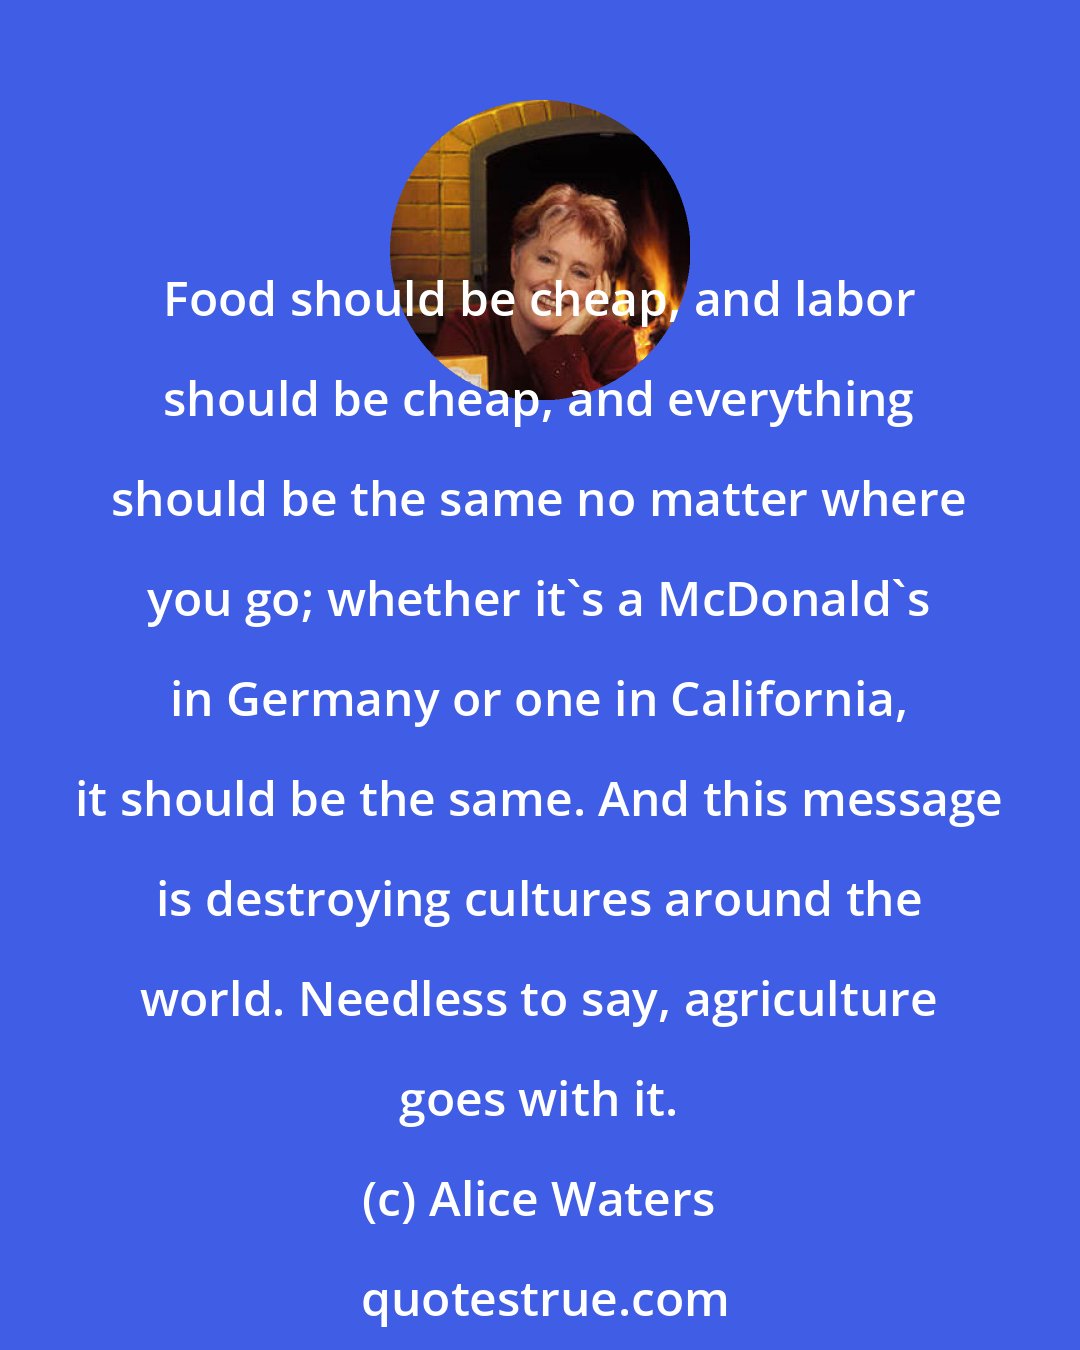 Alice Waters: Food should be cheap, and labor should be cheap, and everything should be the same no matter where you go; whether it's a McDonald's in Germany or one in California, it should be the same. And this message is destroying cultures around the world. Needless to say, agriculture goes with it.